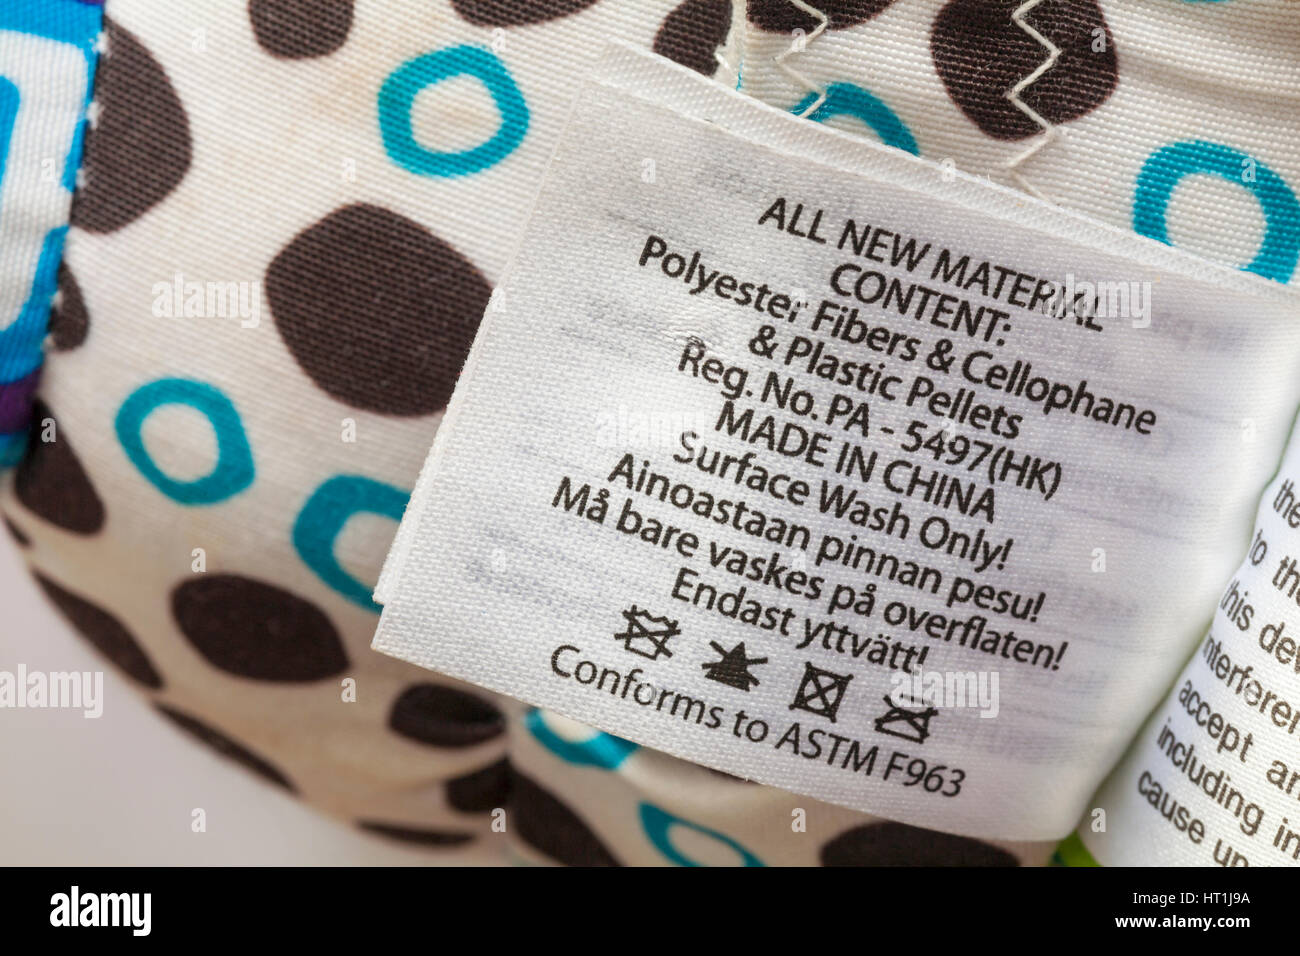 Information on label on Lamaze Trotter the pony toy made in China showing contents and washing instructions - sold in the UK United Kingdom Stock Photo